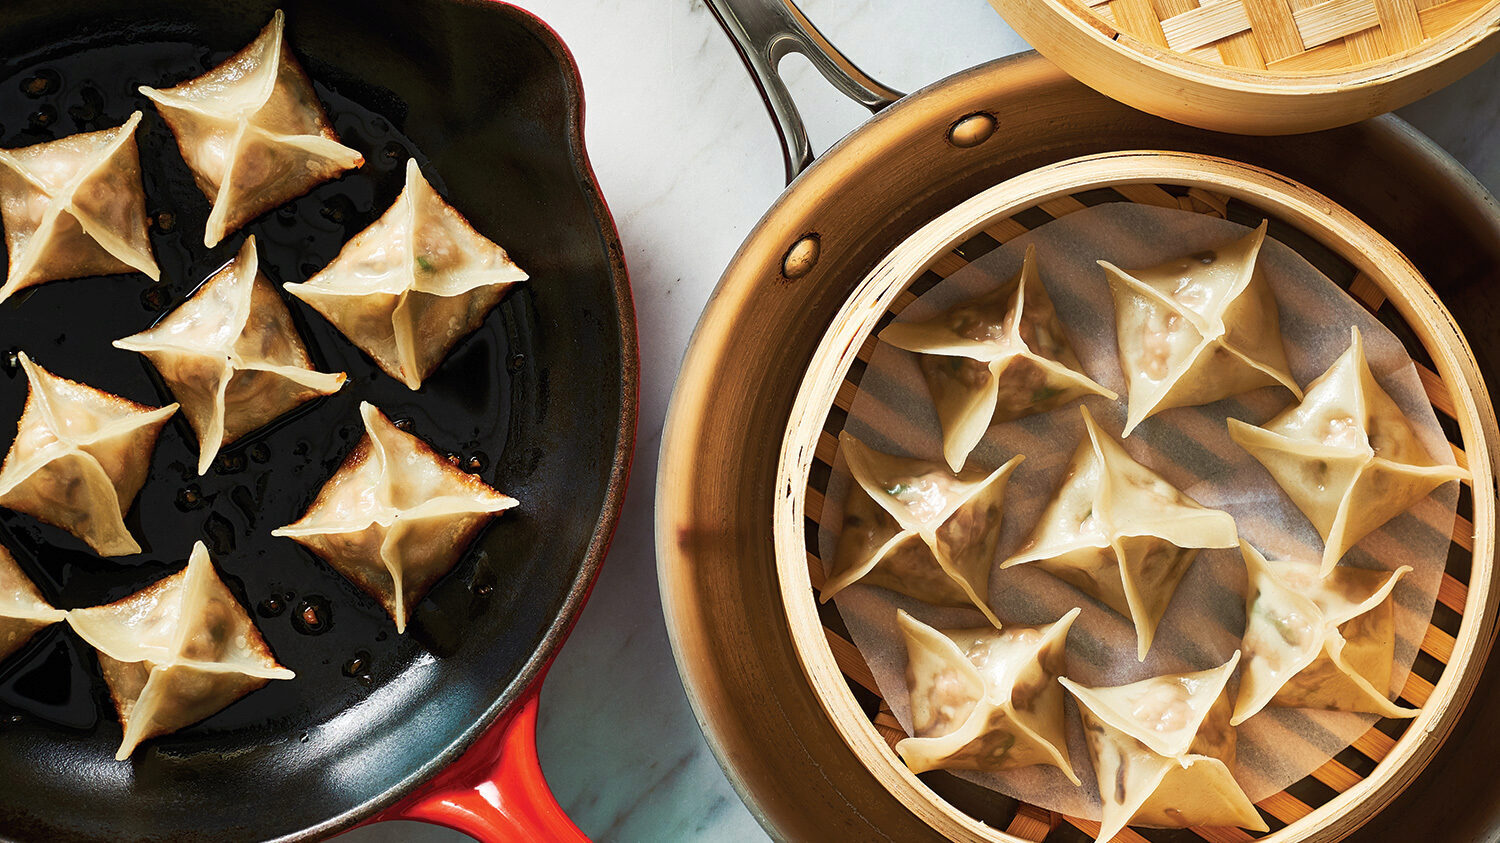 Read more about A Beginner’s Guide to Chinese-Style Cooking